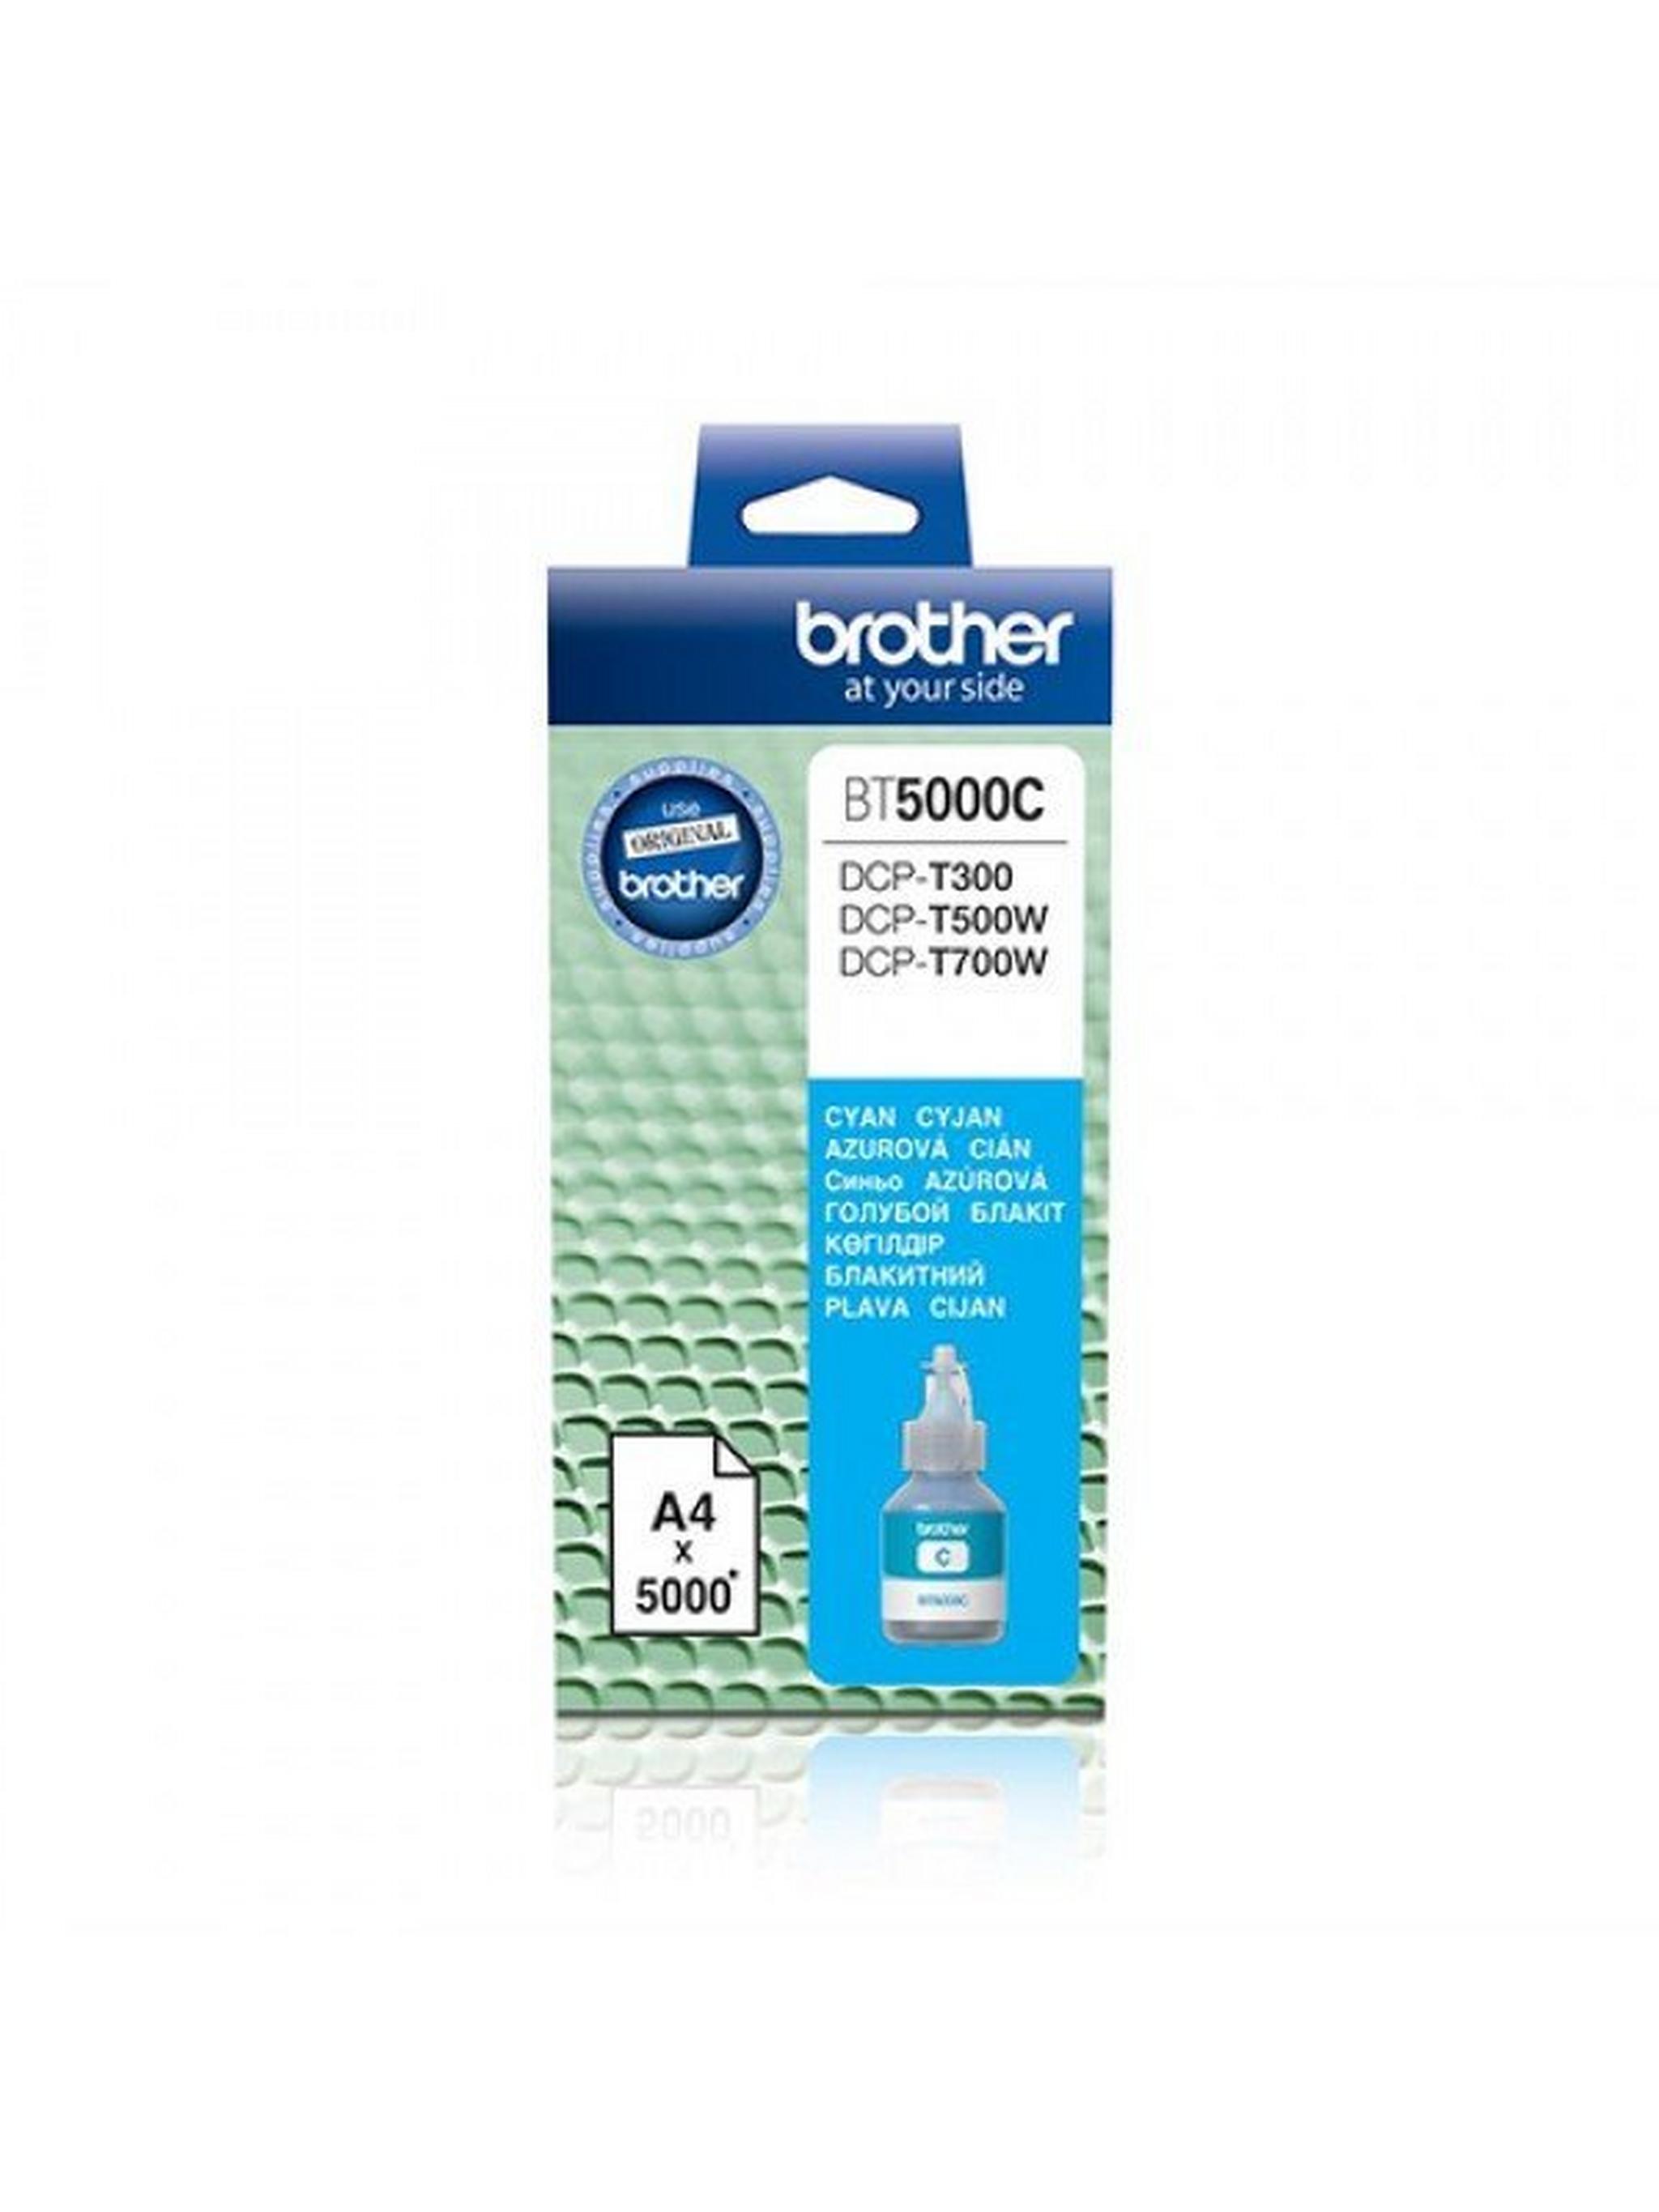 BROTHER Ink BT5000C for Inkjet Printing 5000 Page Yield - Cyan (Single Colour Pack)